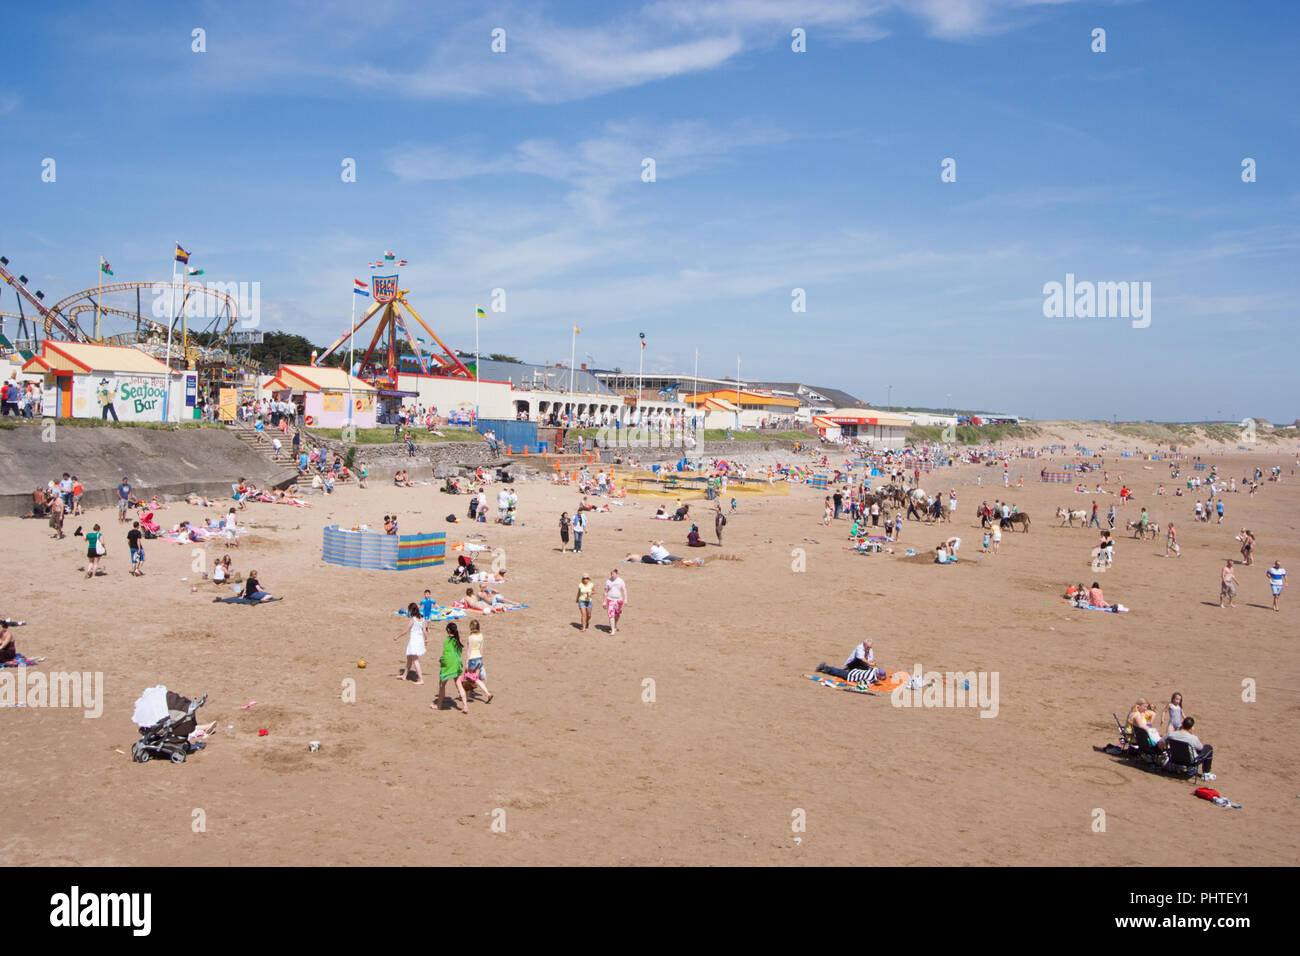 Porthcawl South Wales, UK. Sonniges Wetter entlang der Promenade Richtung Coney Strand. Stockfoto